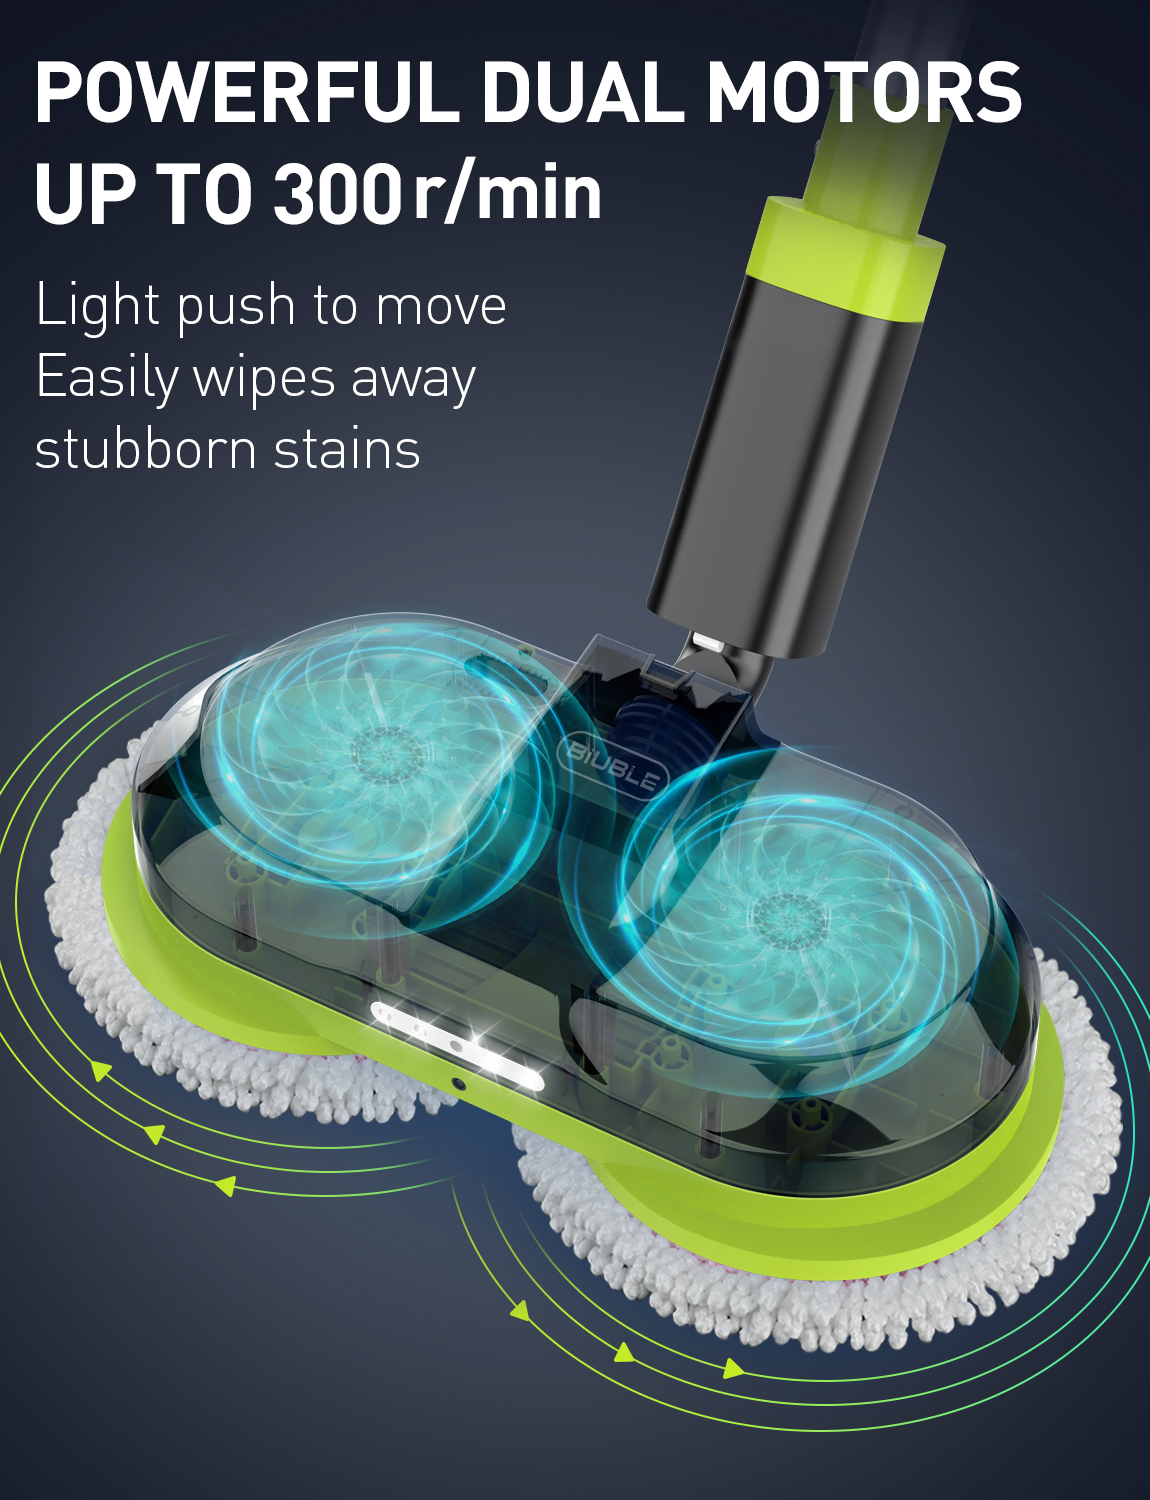 Electric Mop, Cordless Electric Mop with 300ml Water Tank, Spin Mop with  LED Headlight and Sprayer, for Hardwood, Tile, Laminate Floor, Less Than  50dB